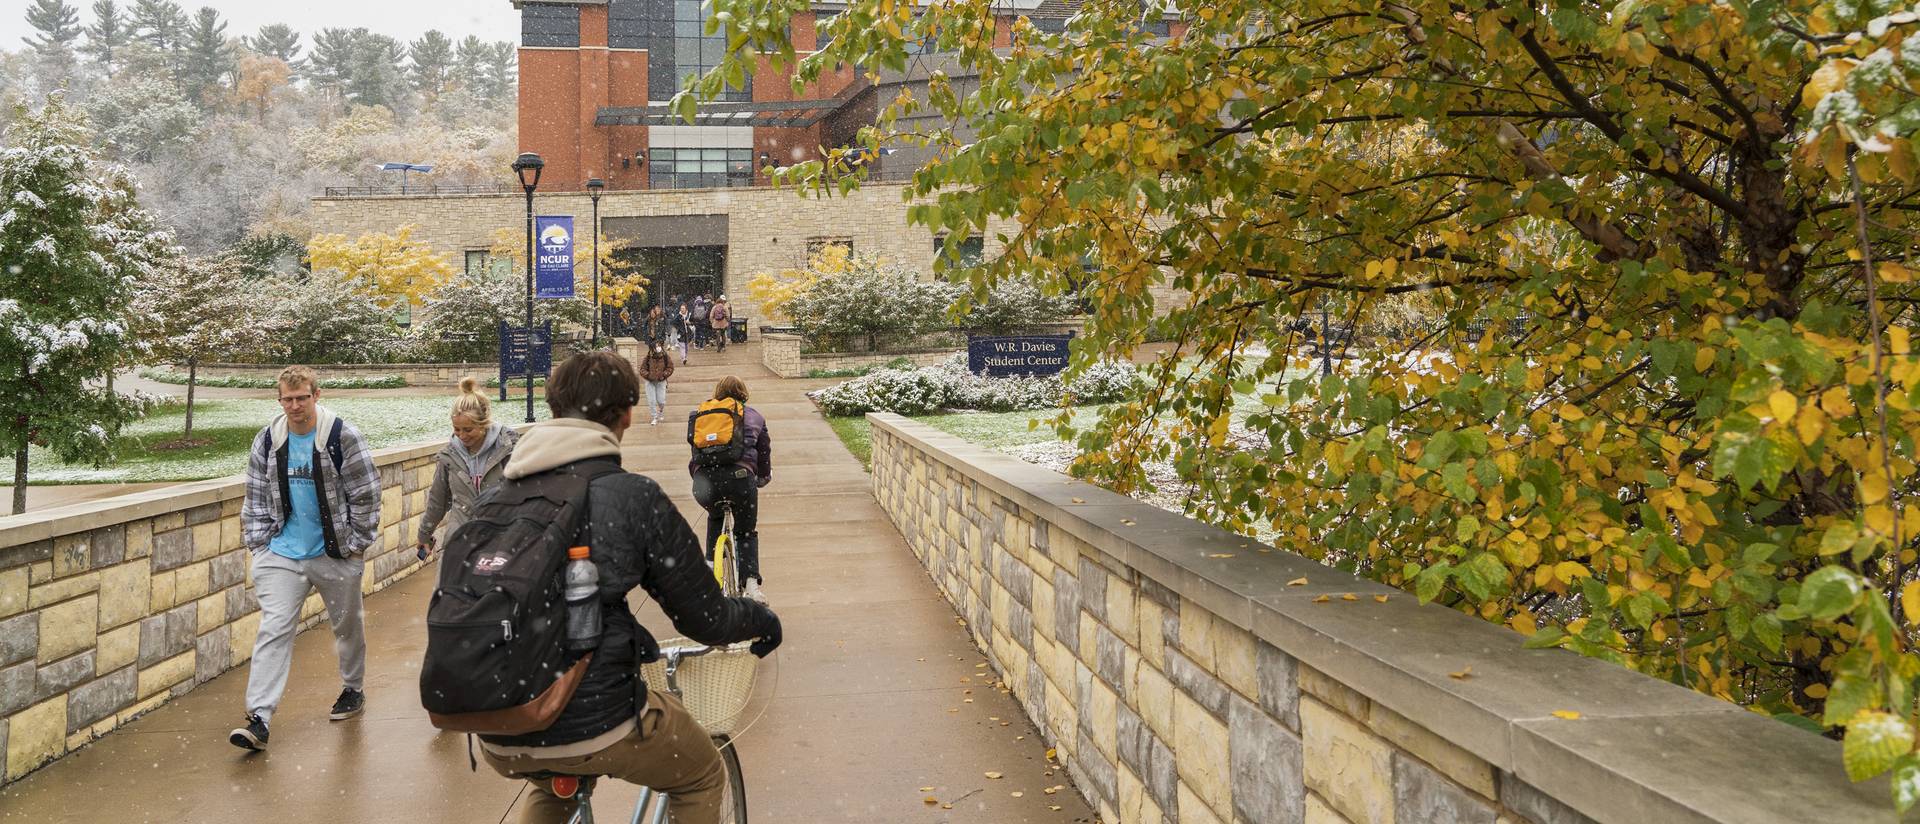 A student rides a bike across campus.